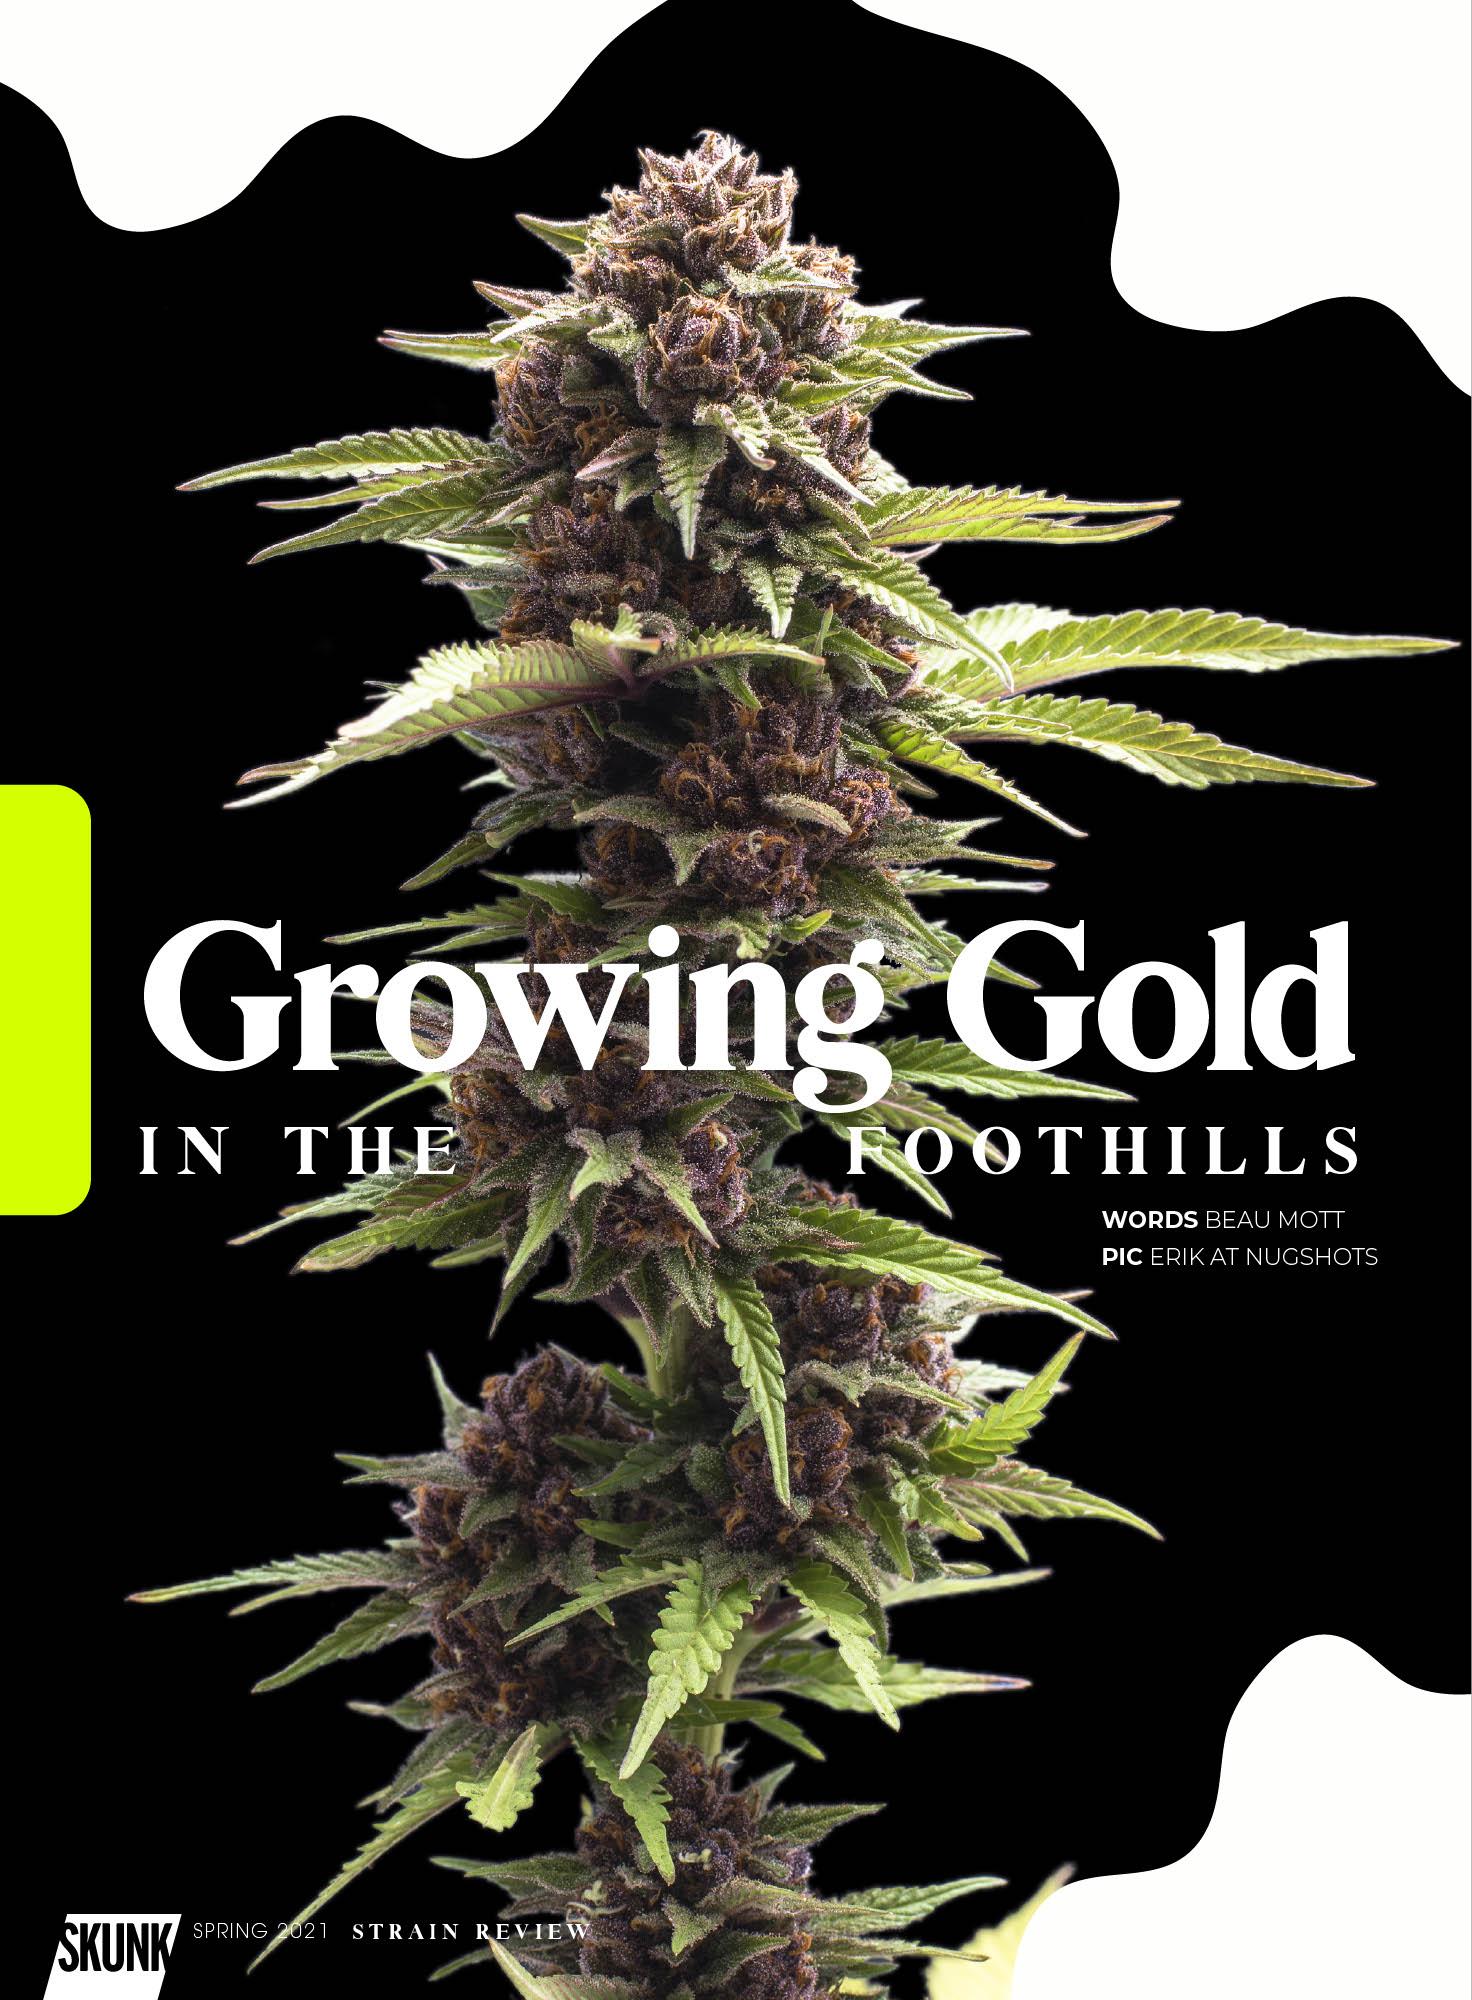 Growing Gold in the Foothills